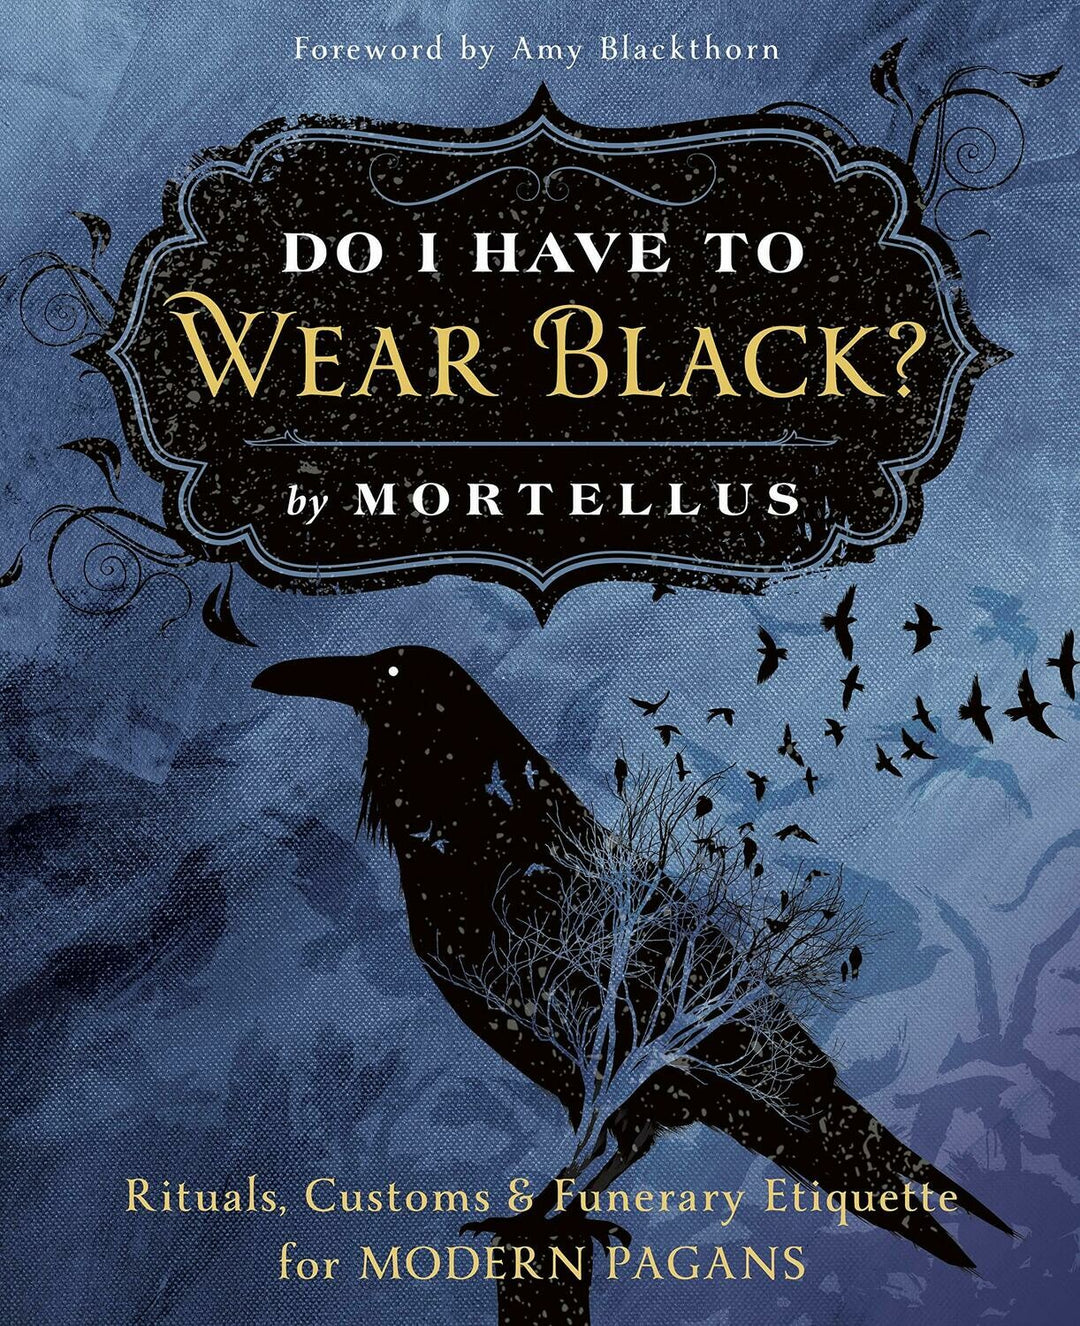 Do I Have To Wear Black by Mortellus